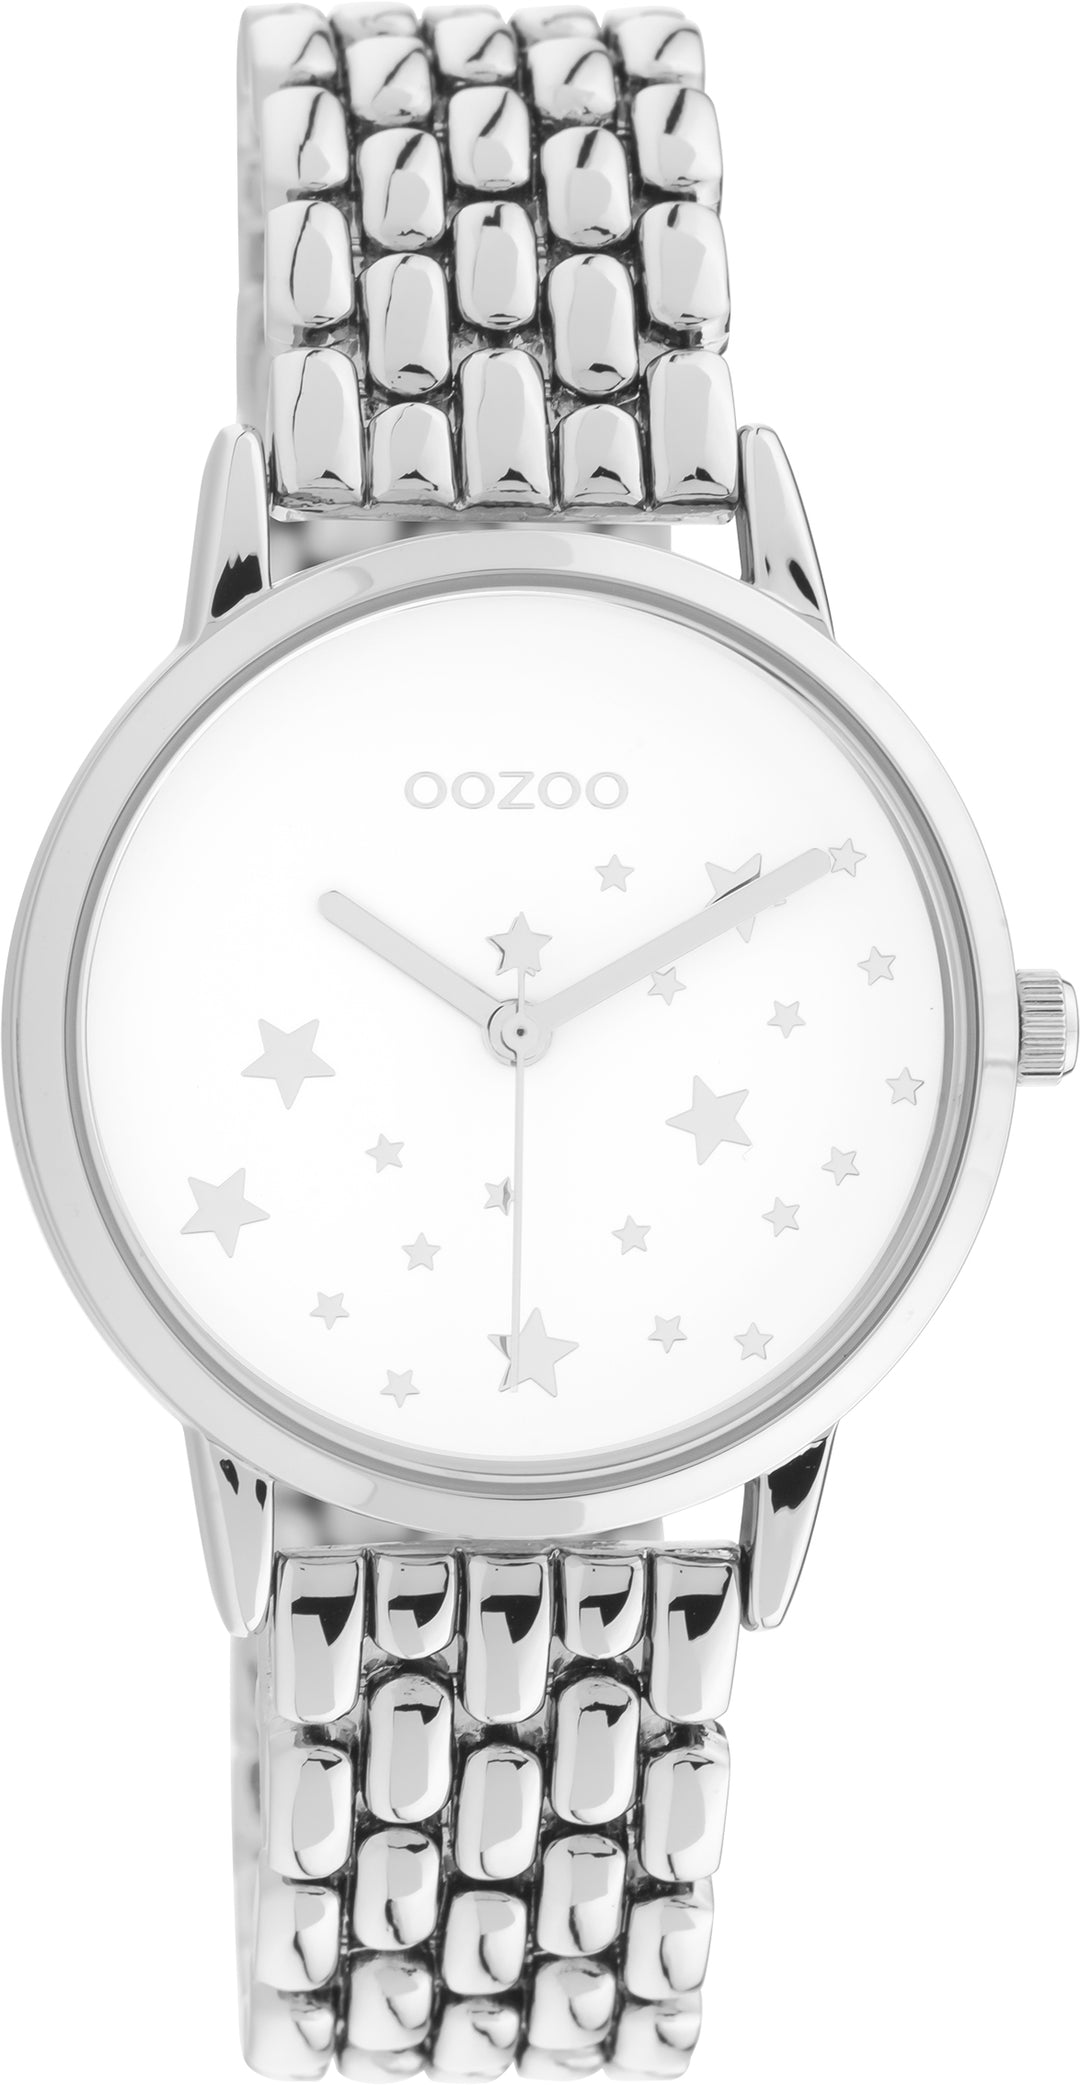 Oozoo Timepieces C11025 white silver 34mm